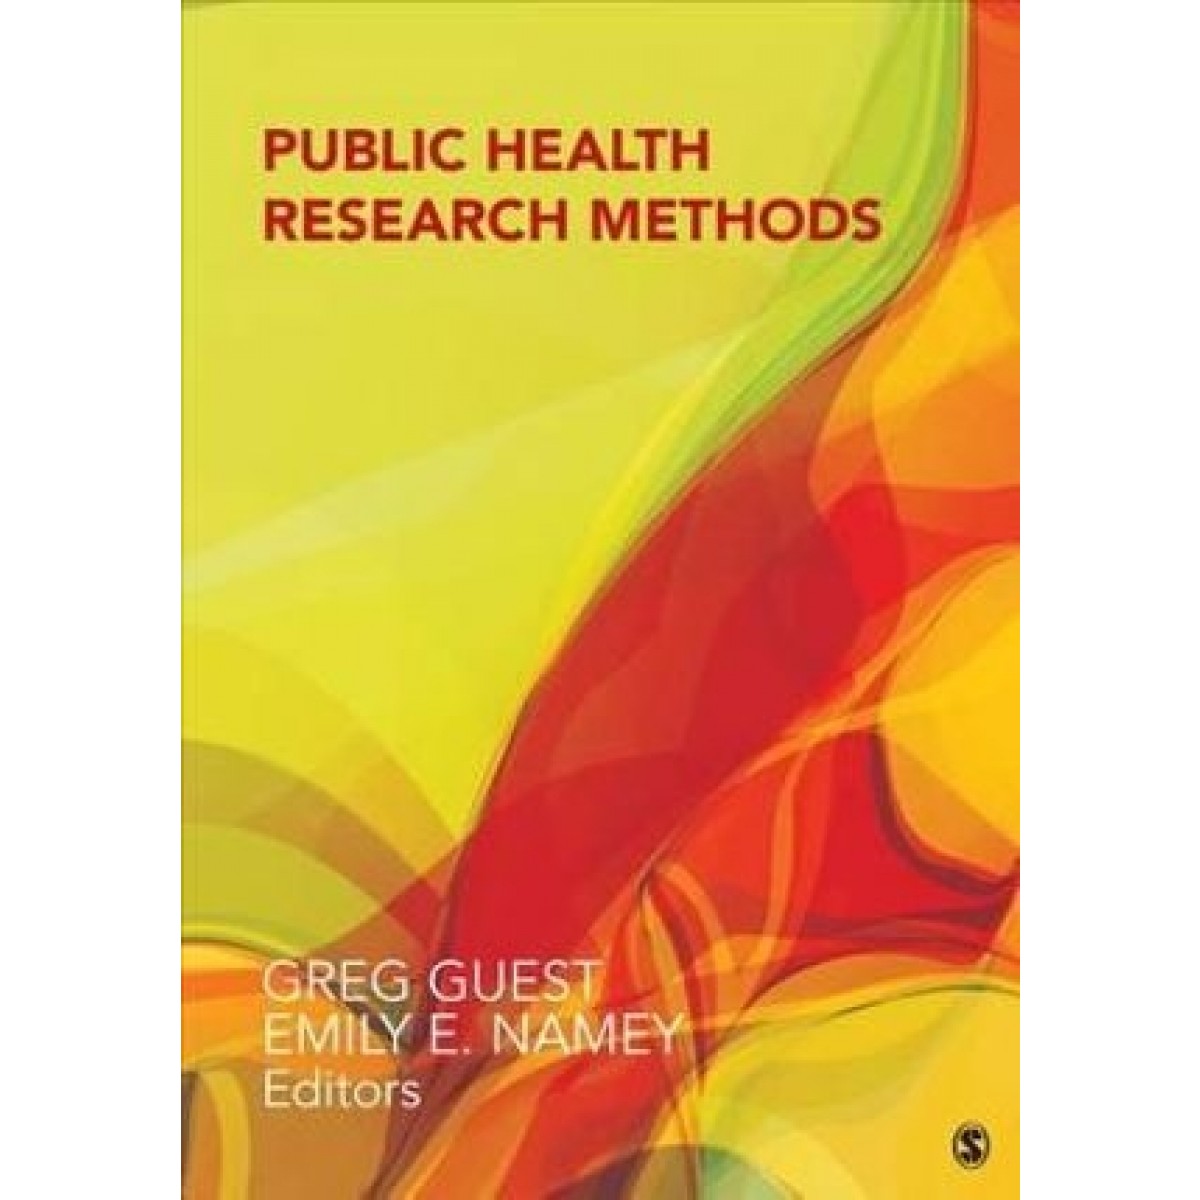 health research methods journal